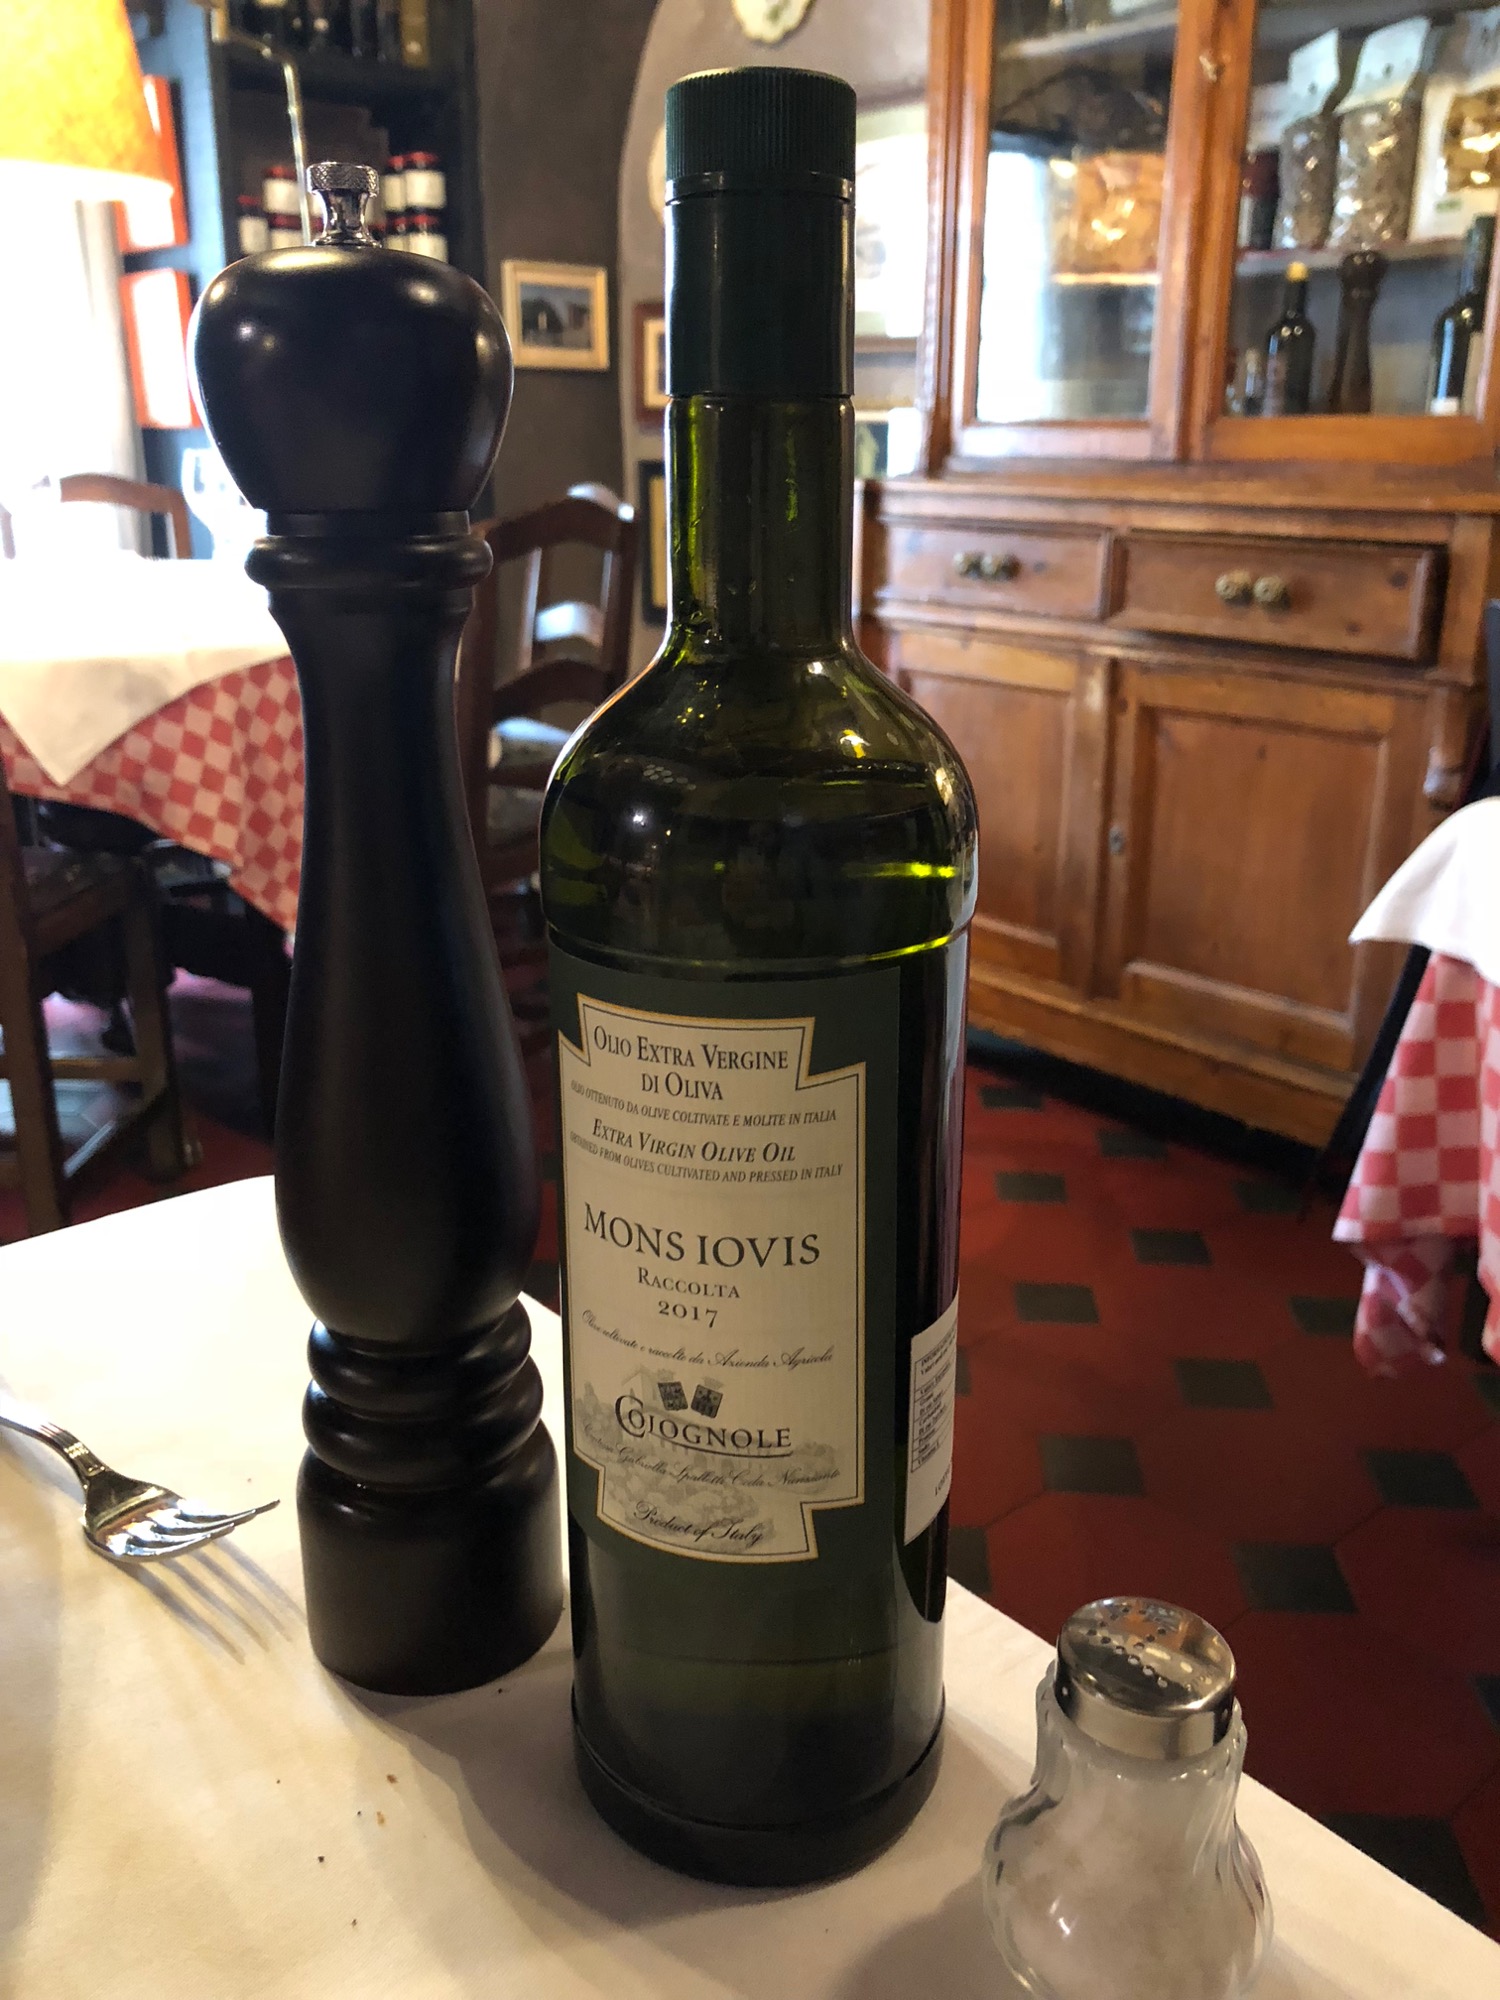 a bottle of wine next to a pepper mill